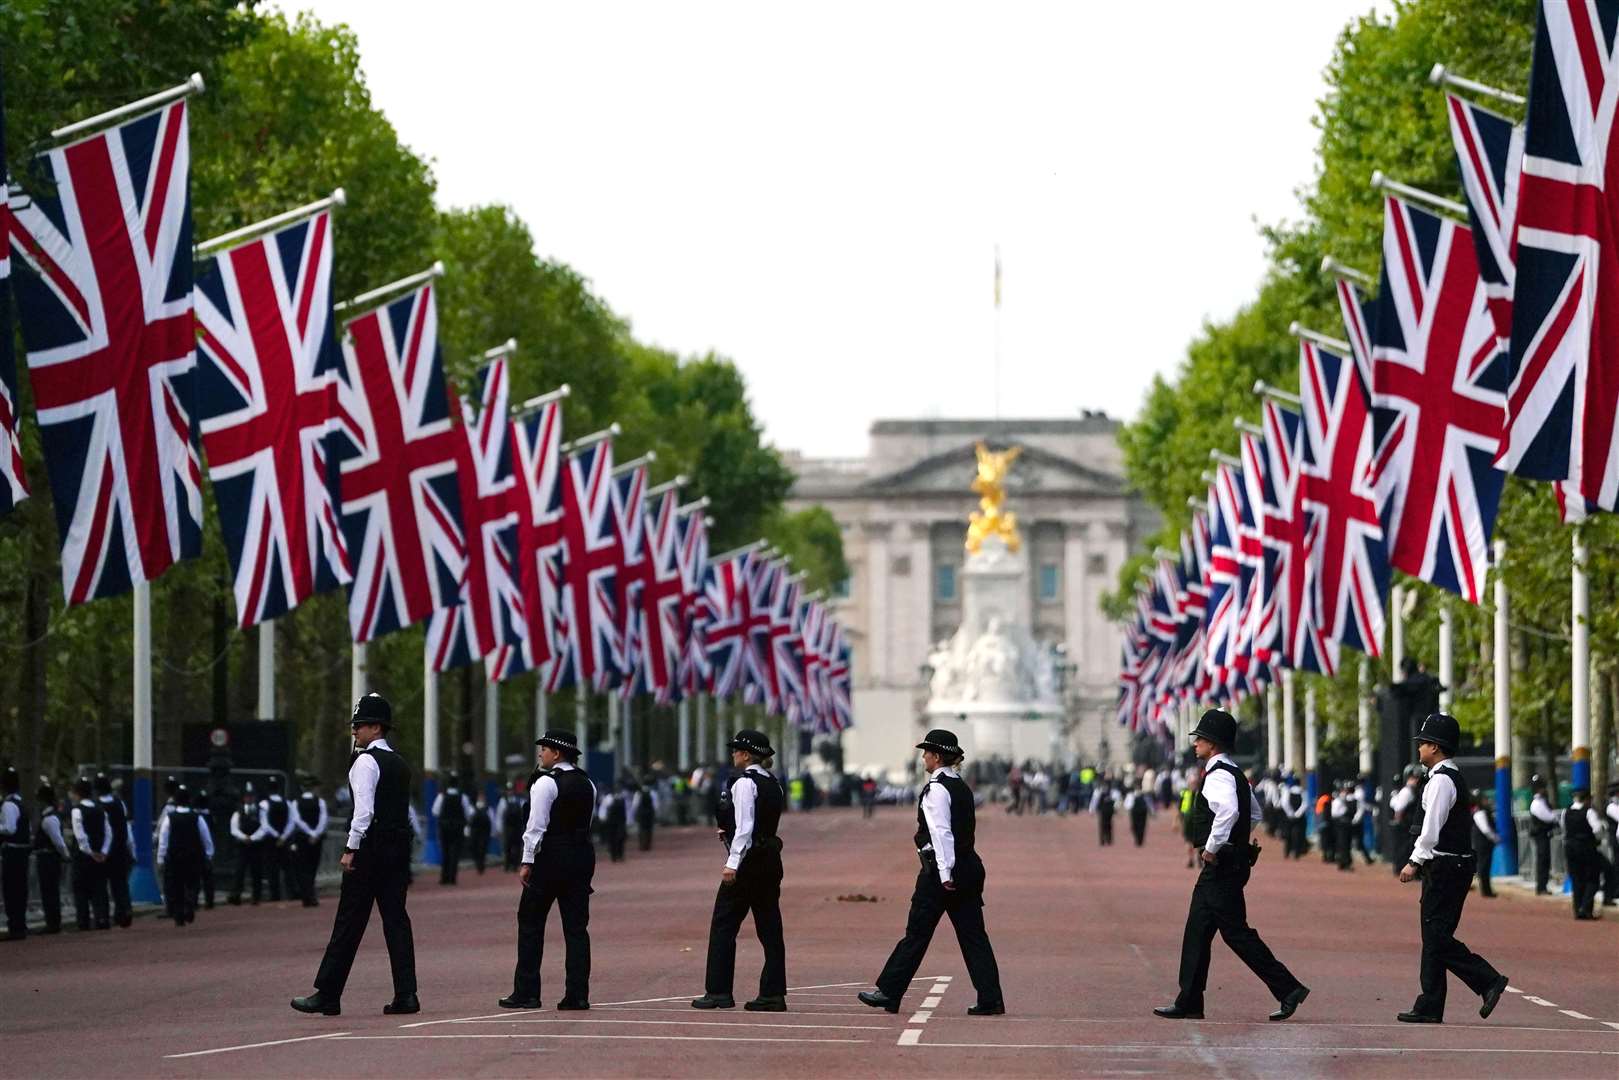 Police chiefs will have learned lessons from the operations for the Queen’s funeral, close protection expert Richard Aitch said (Victoria Jones/PA)